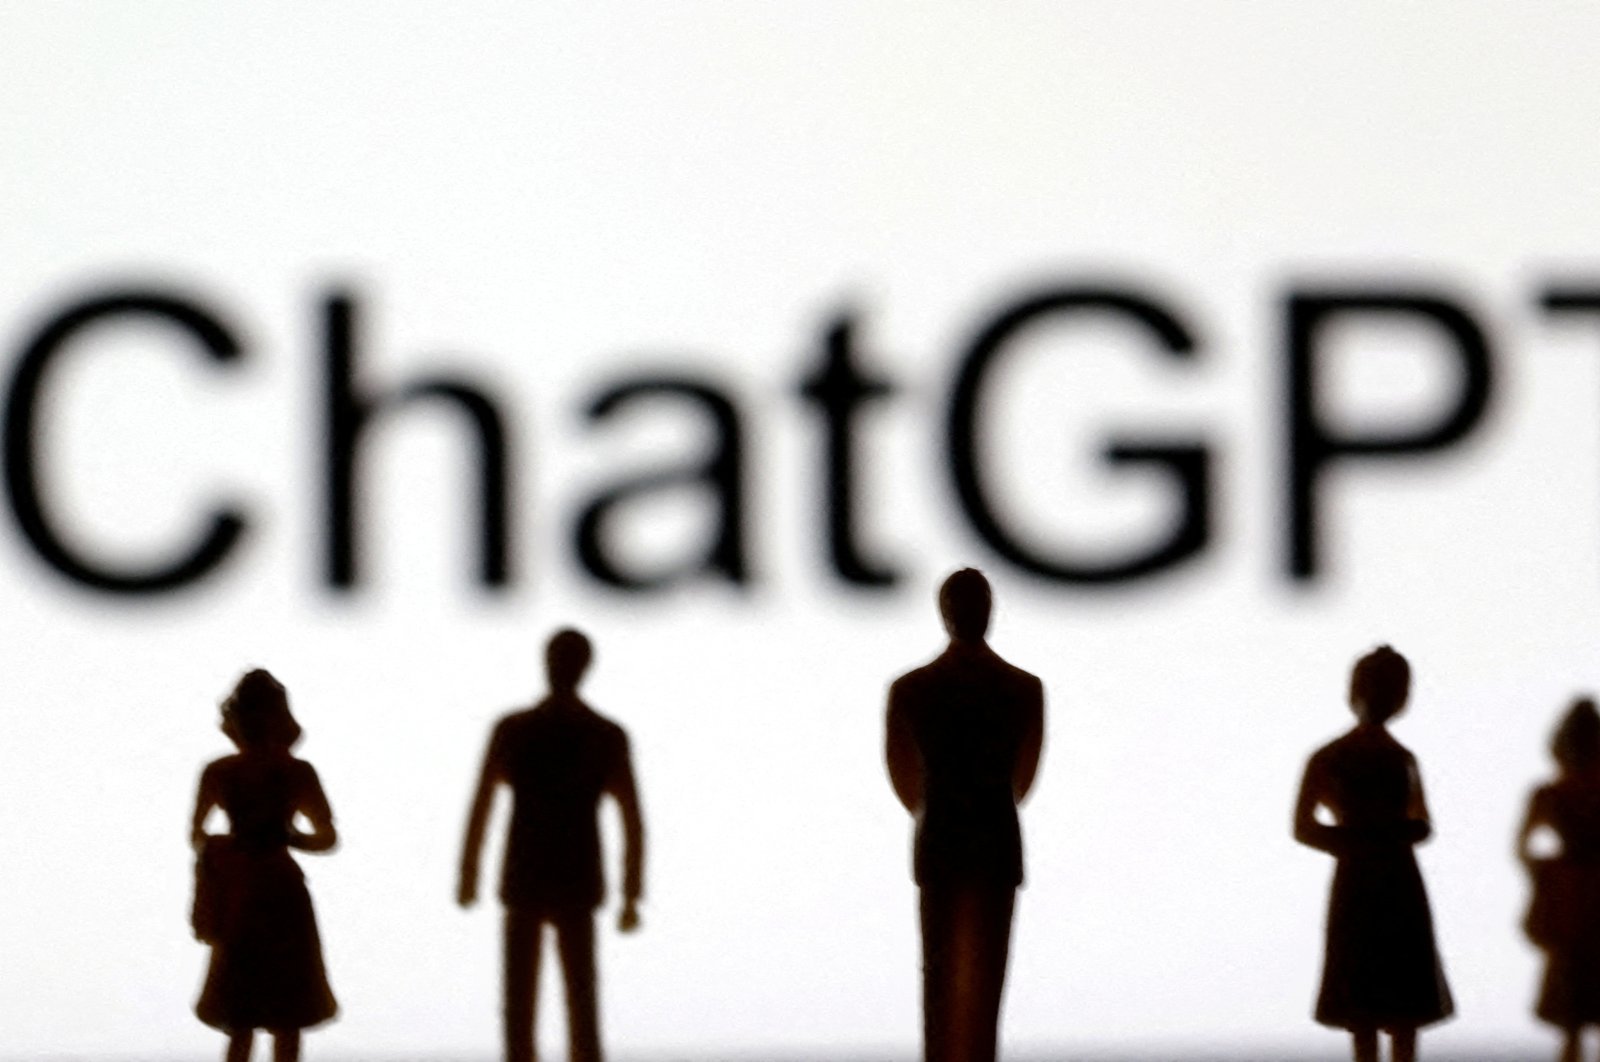 The ChatGPT logo is seen in this illustration taken on Feb. 3, 2023. (Reuters File Photo)